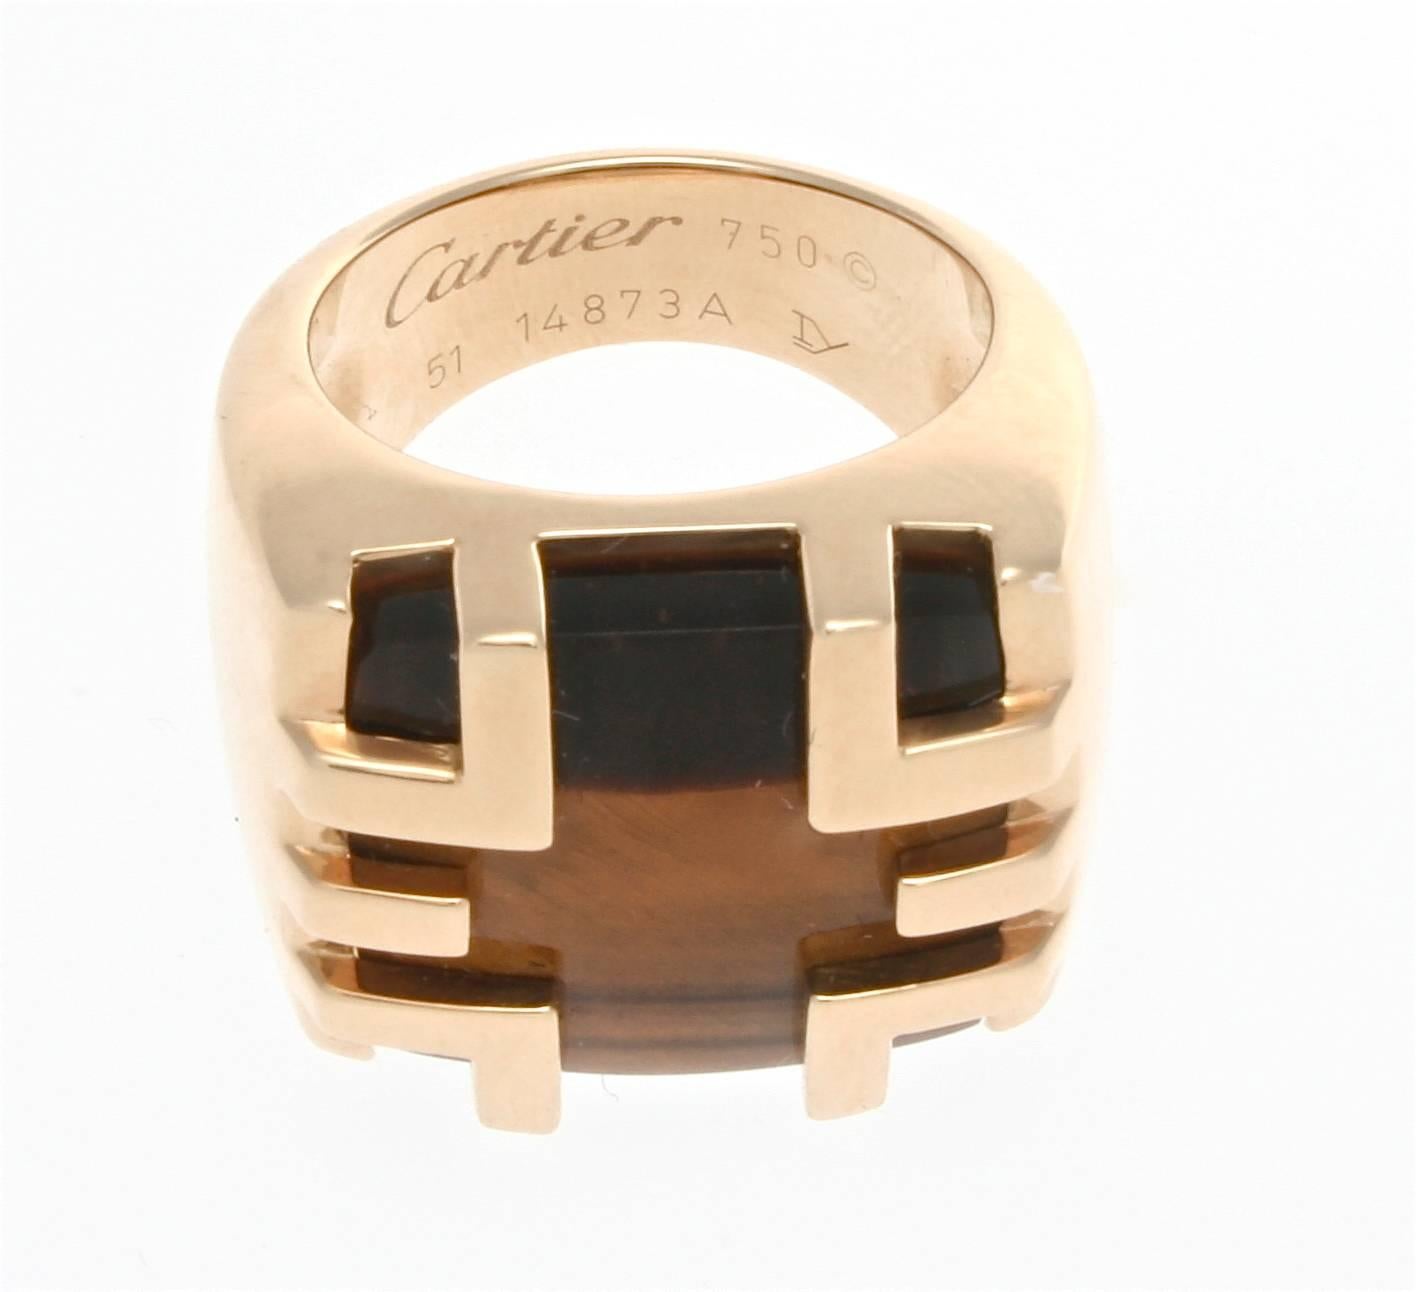 Women's Cartier Tiger's Eye Gold Cage Ring